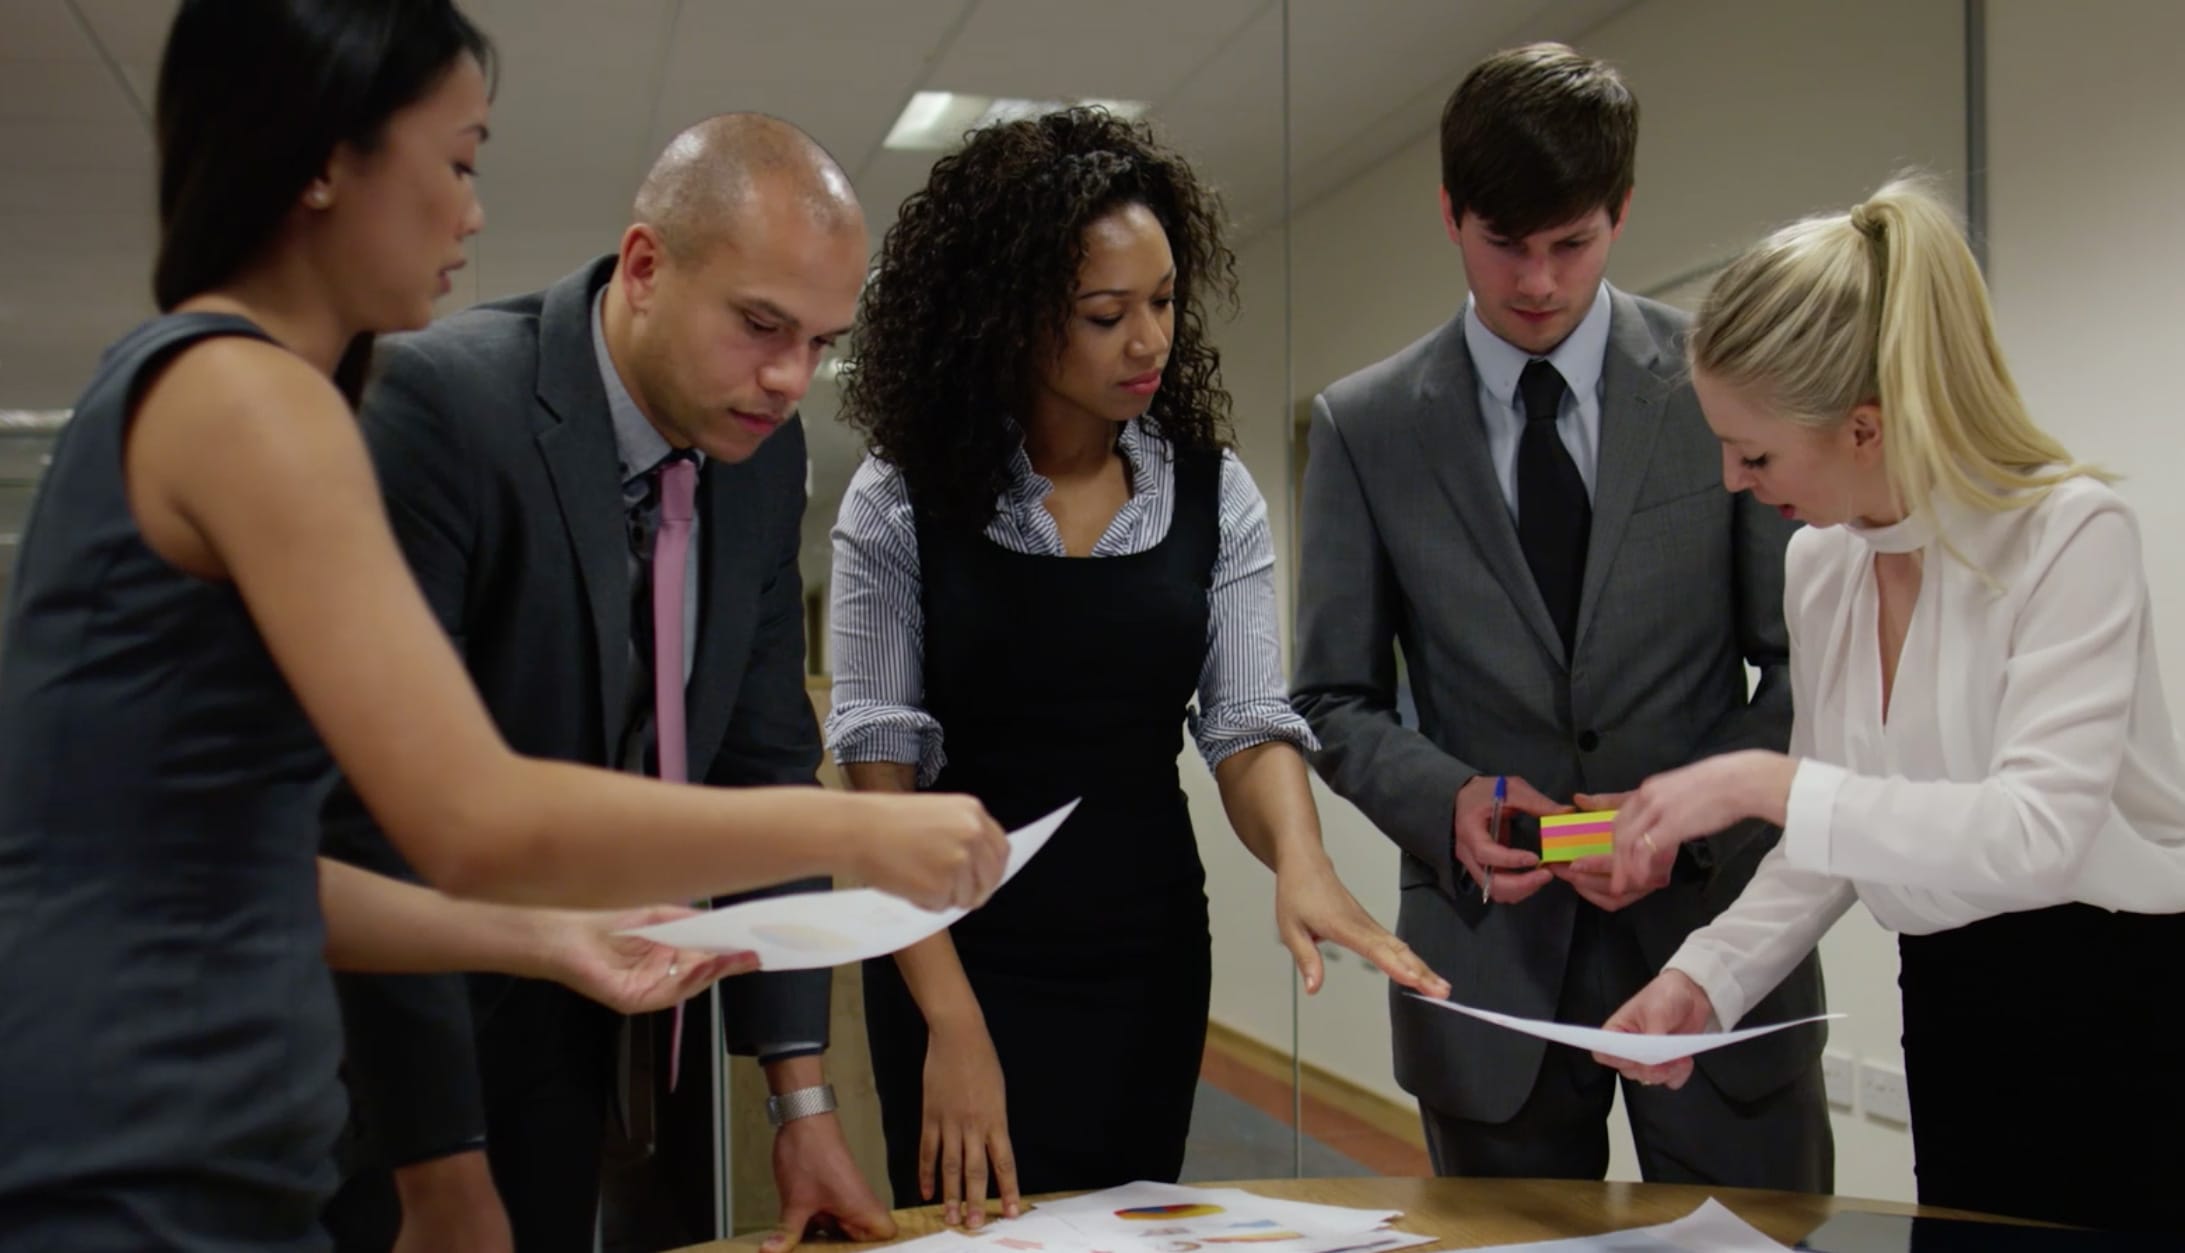 group of business professionals looking at documents